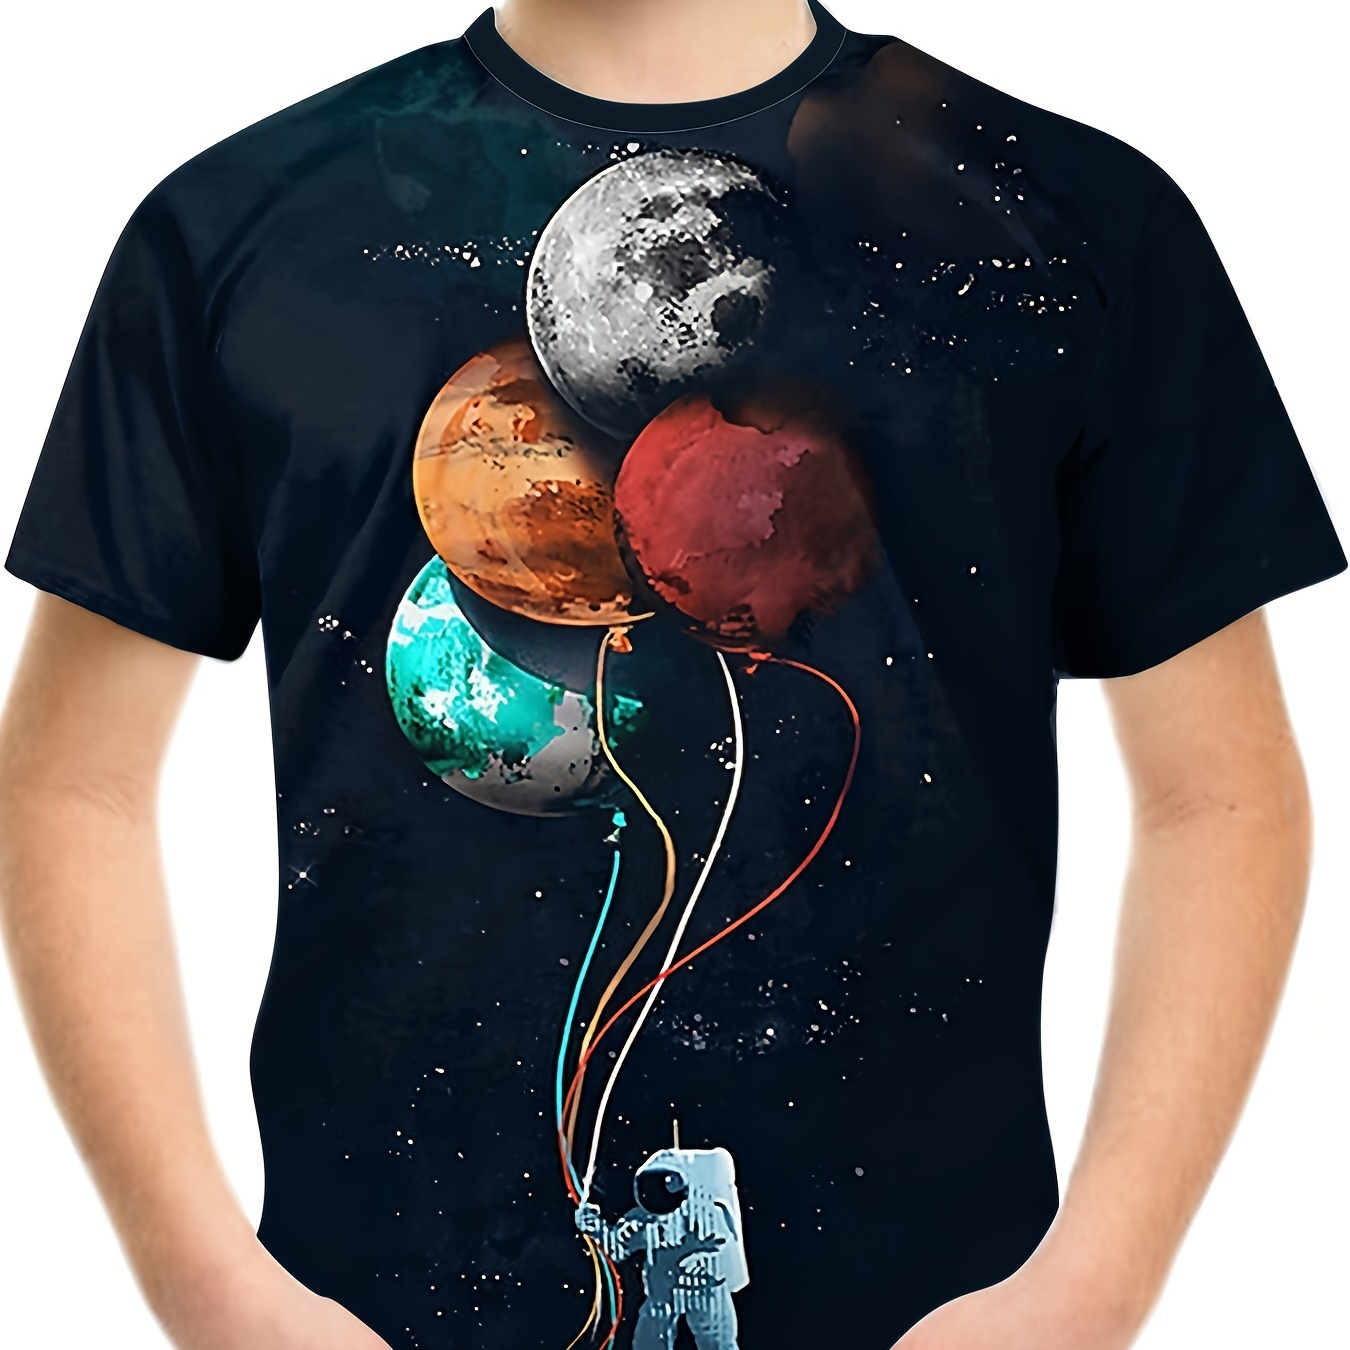 

Cartoon Space Astronaut And 3d Print T-shirt, Tees For Kids Boys, Casual Short Sleeve T-shirt For Summer Spring Fall, Tops As Gifts